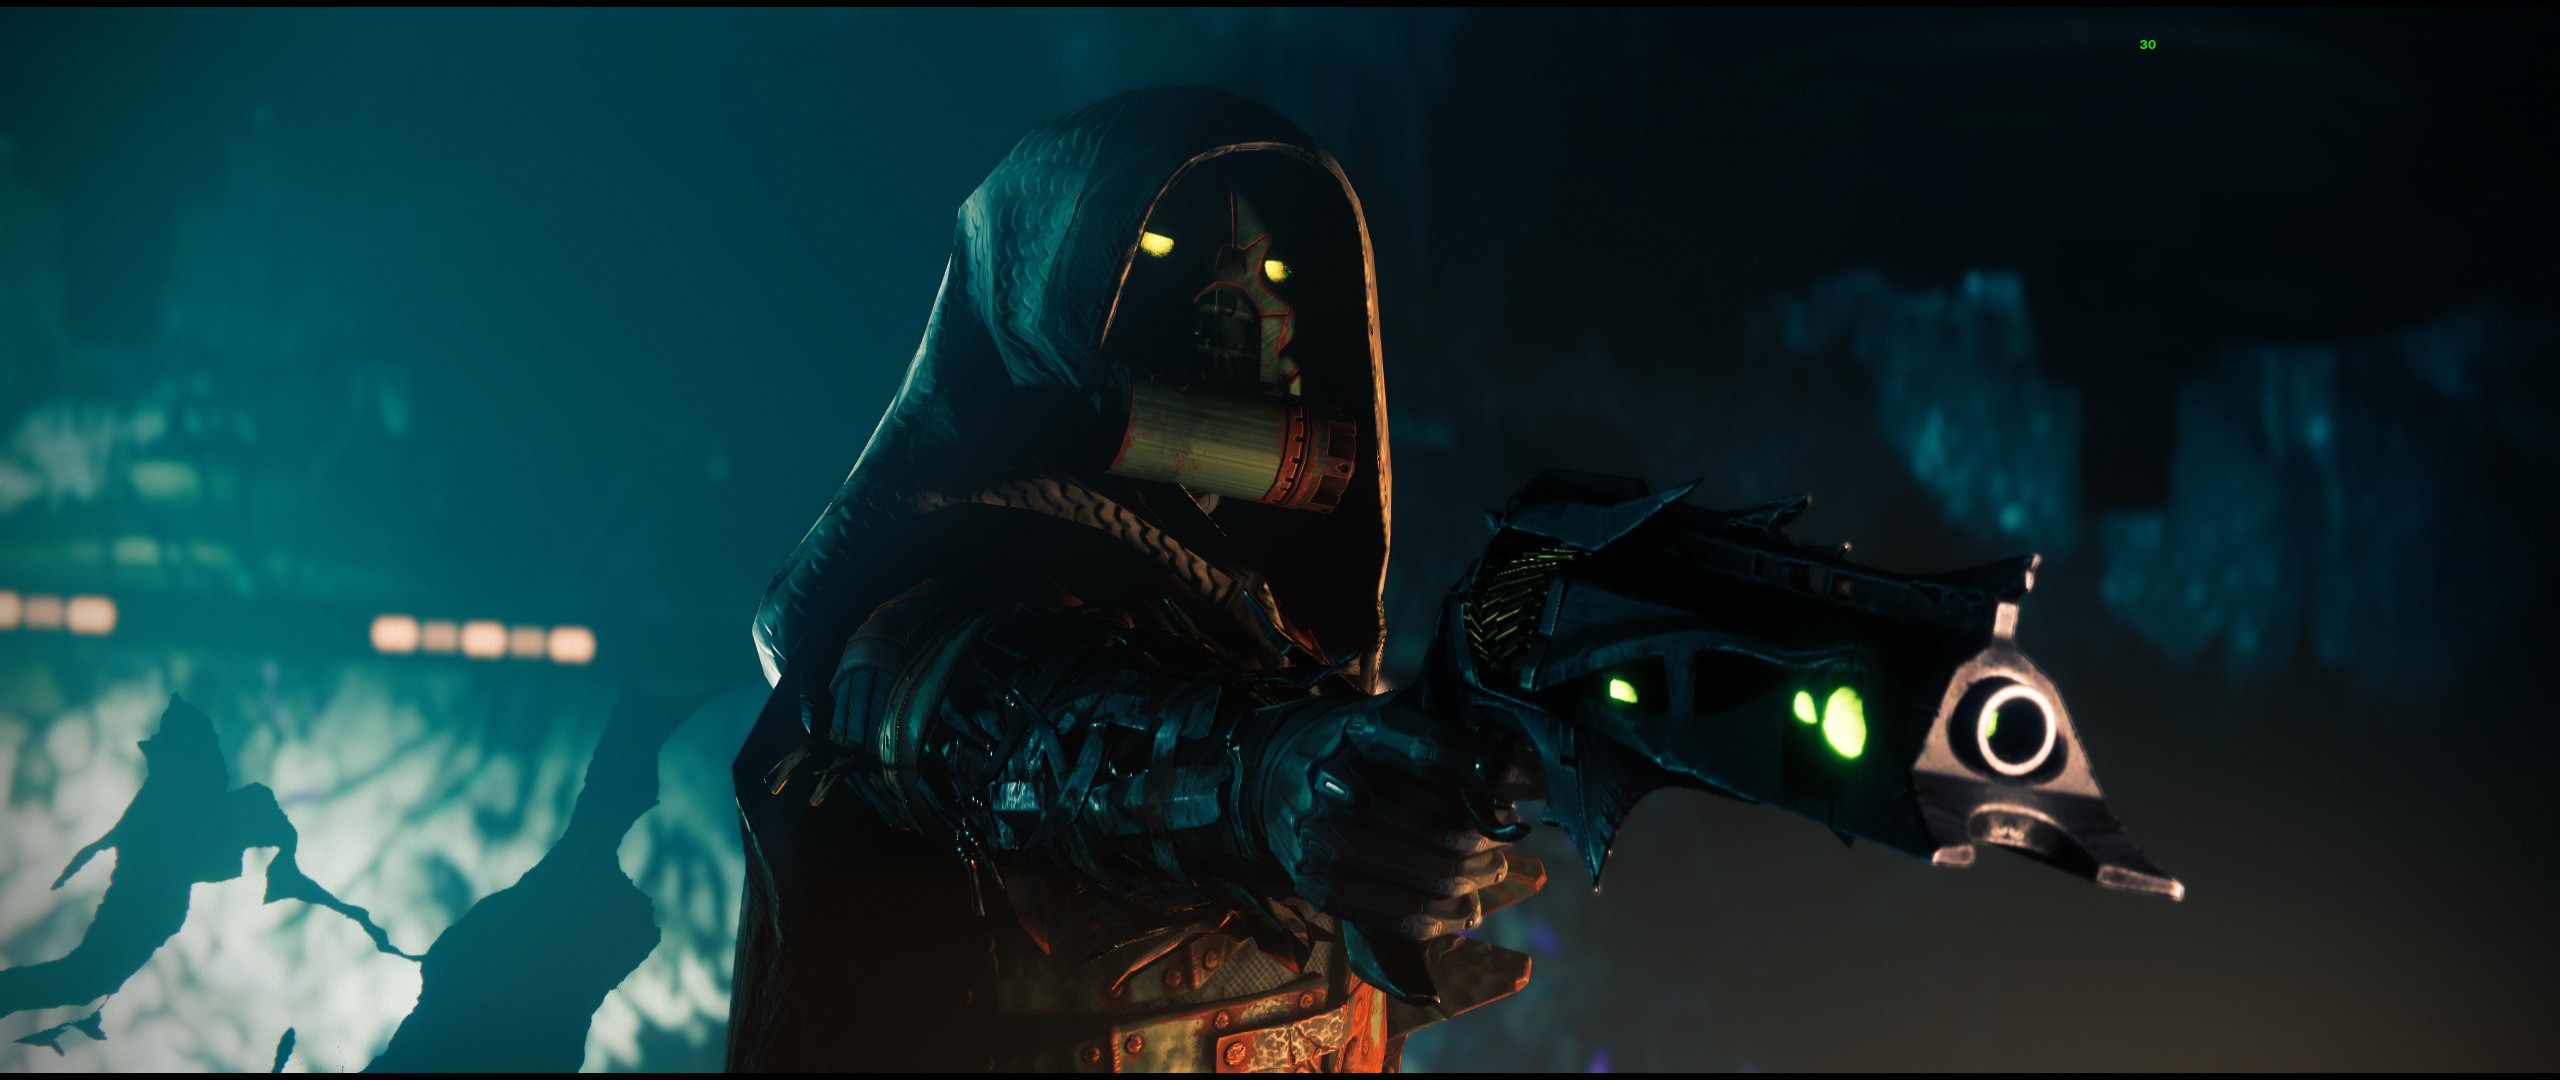 General 2560x1080 Destiny 2 hunter (destiny) video games PC gaming weapon glowing eyes